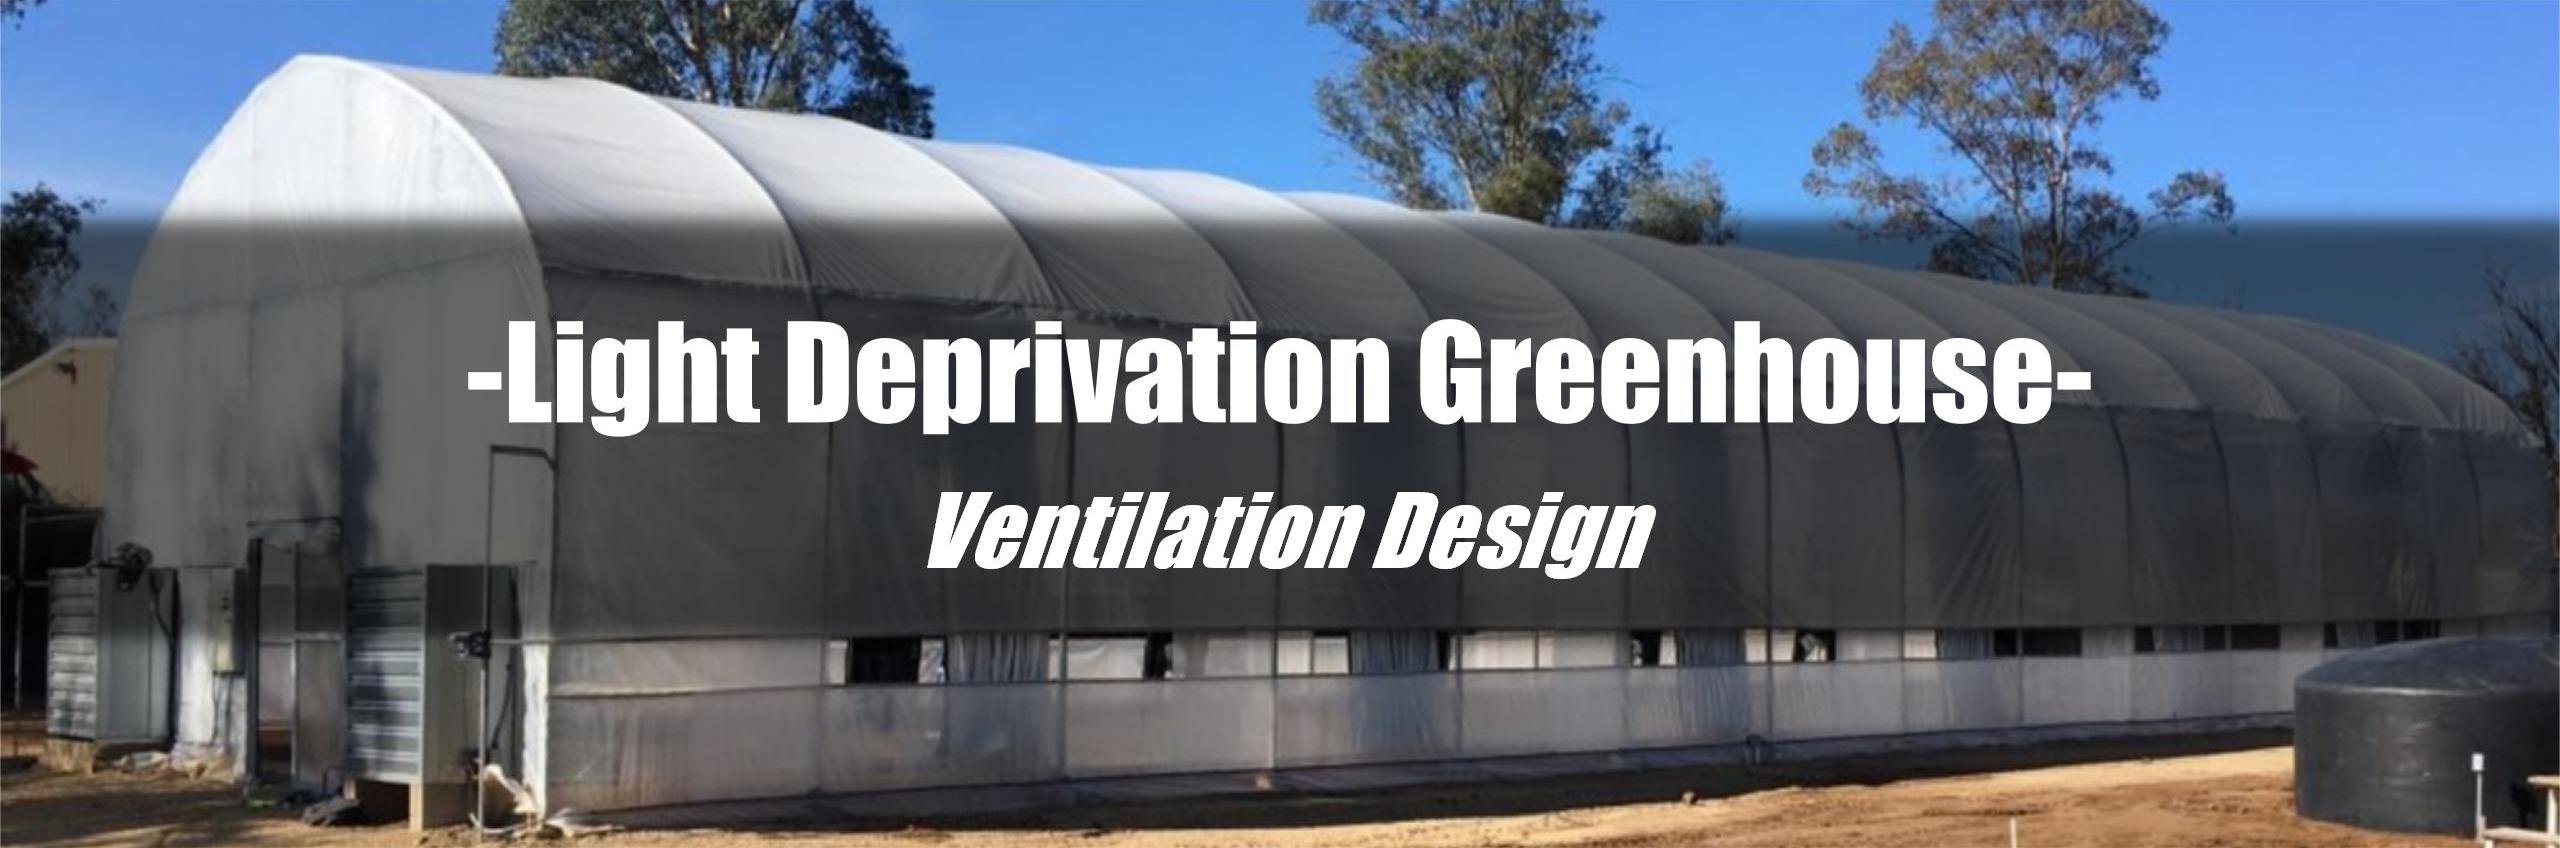 A vent opening design for Light deprivation greenhouse